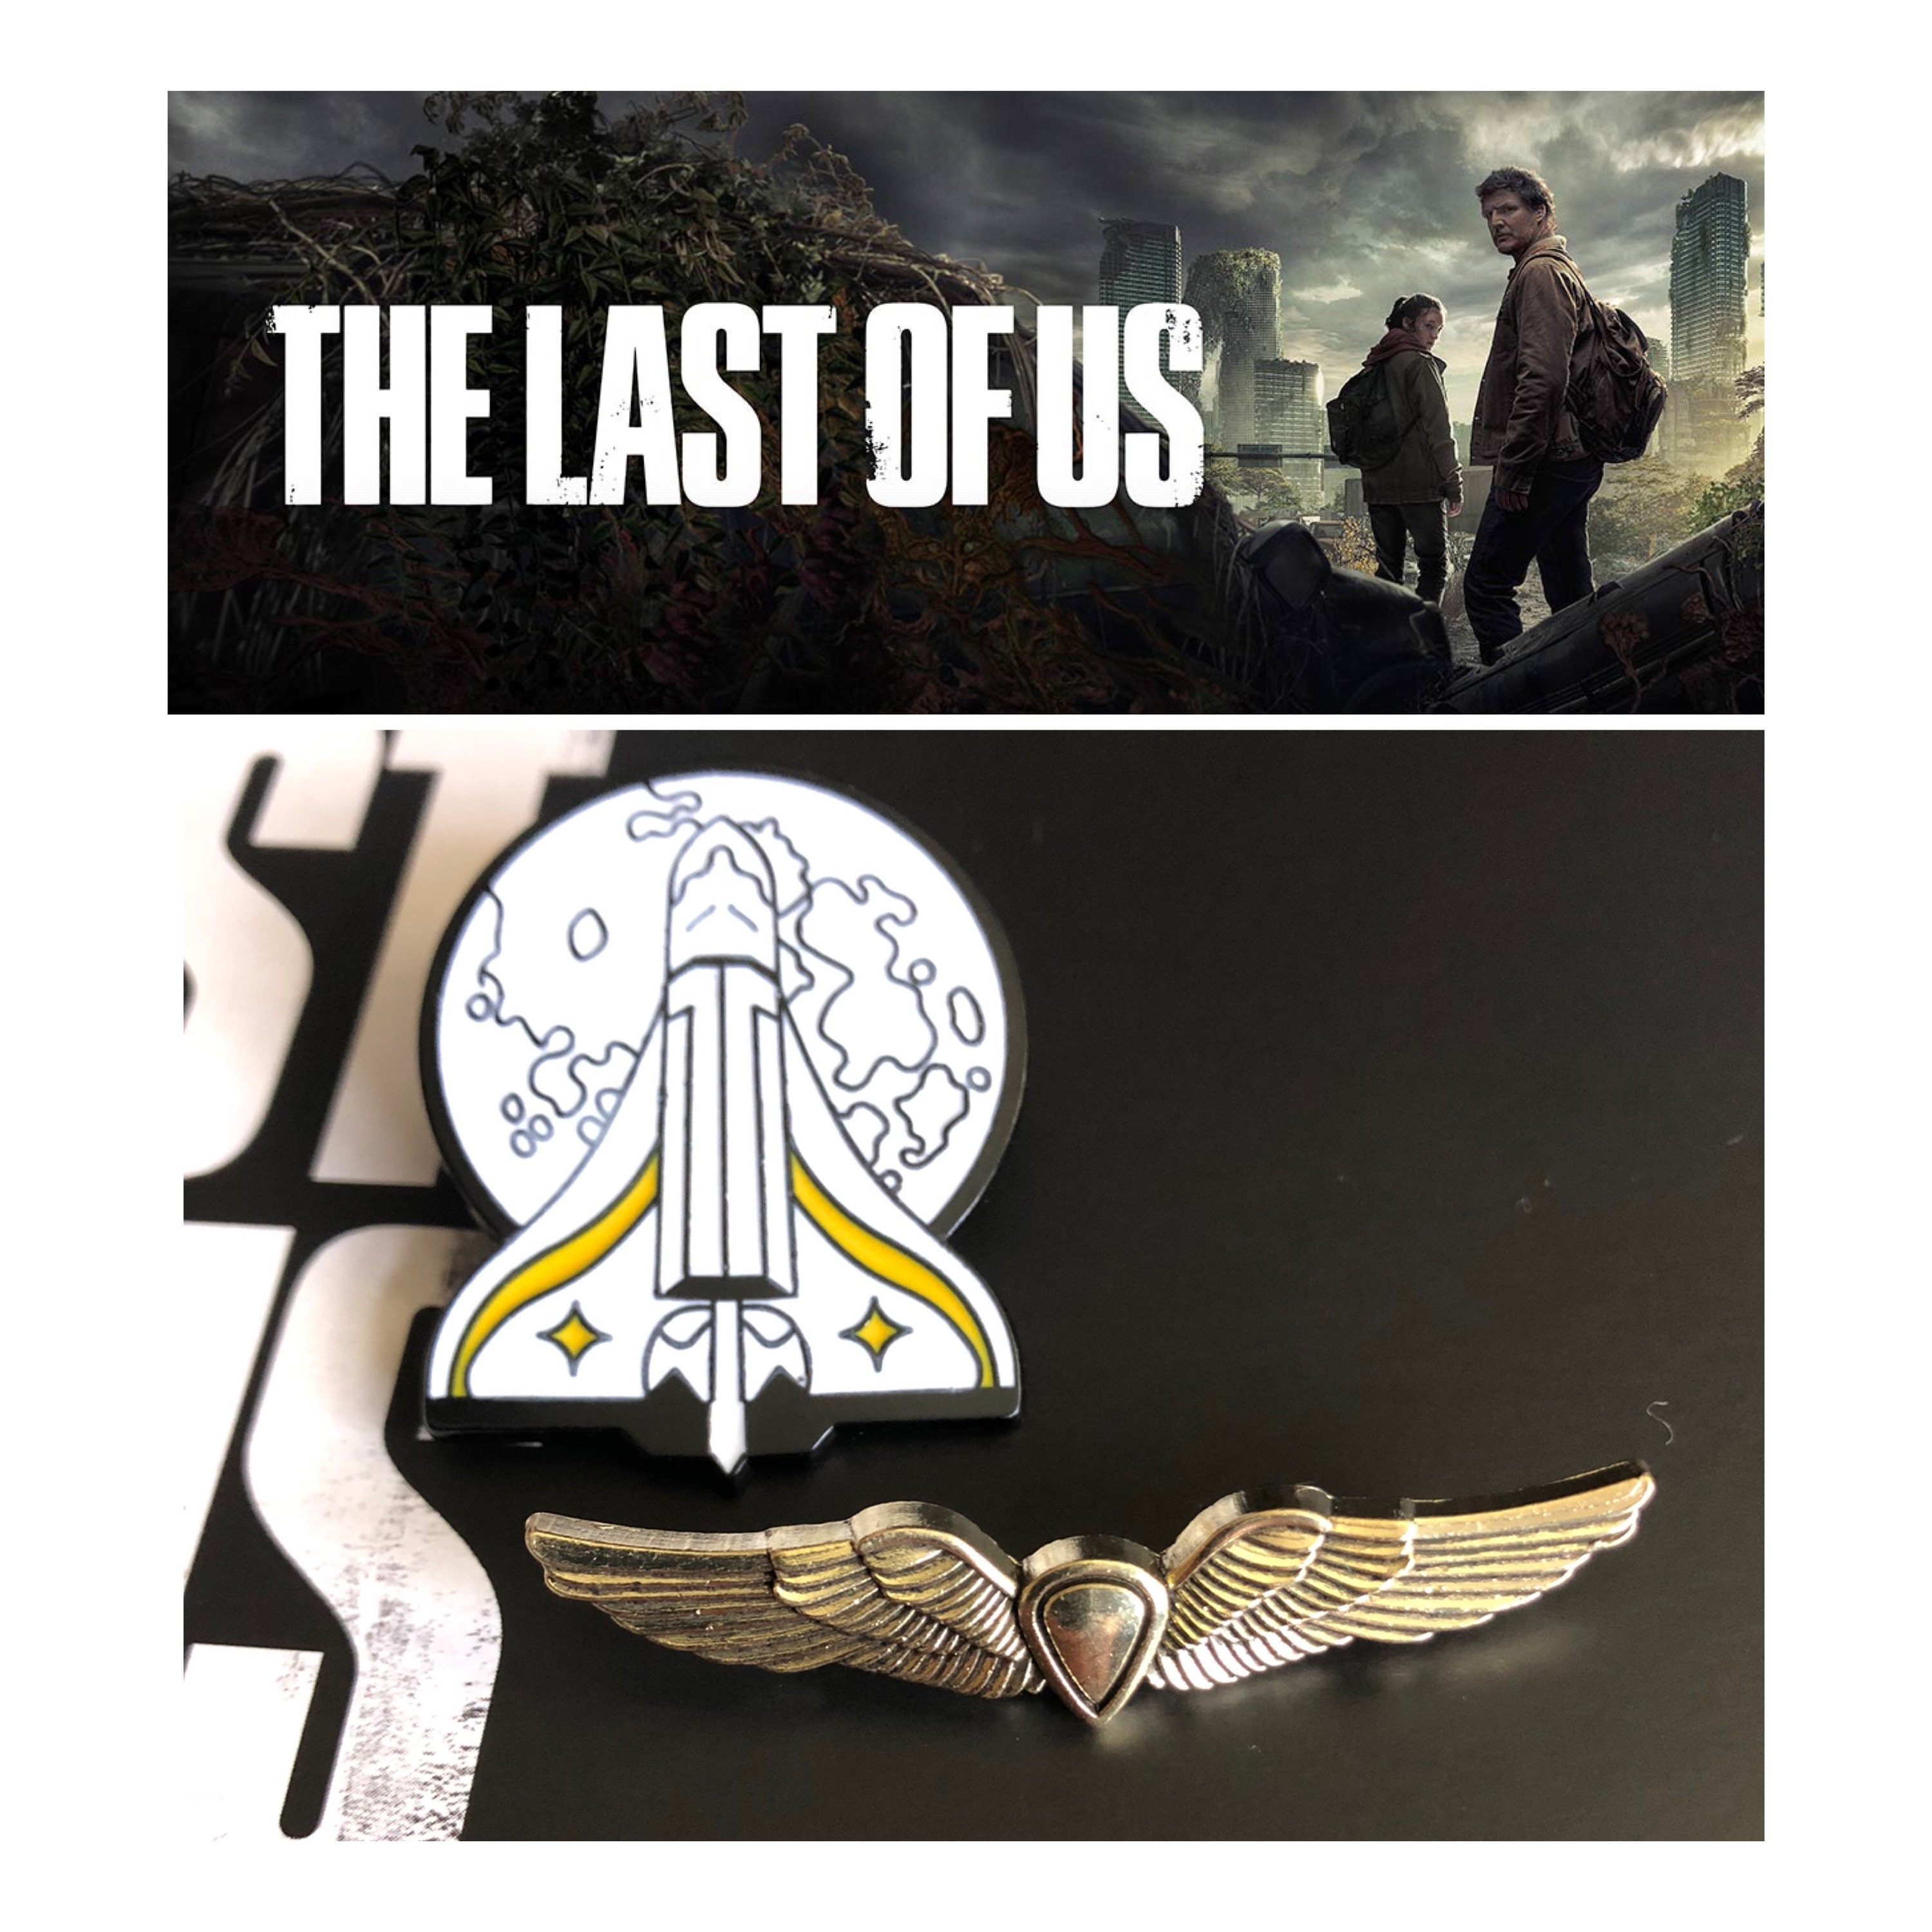 The Last of Us Part 2 II Ellie Edition Pin Badge & Stickers- TLOU (No Game)